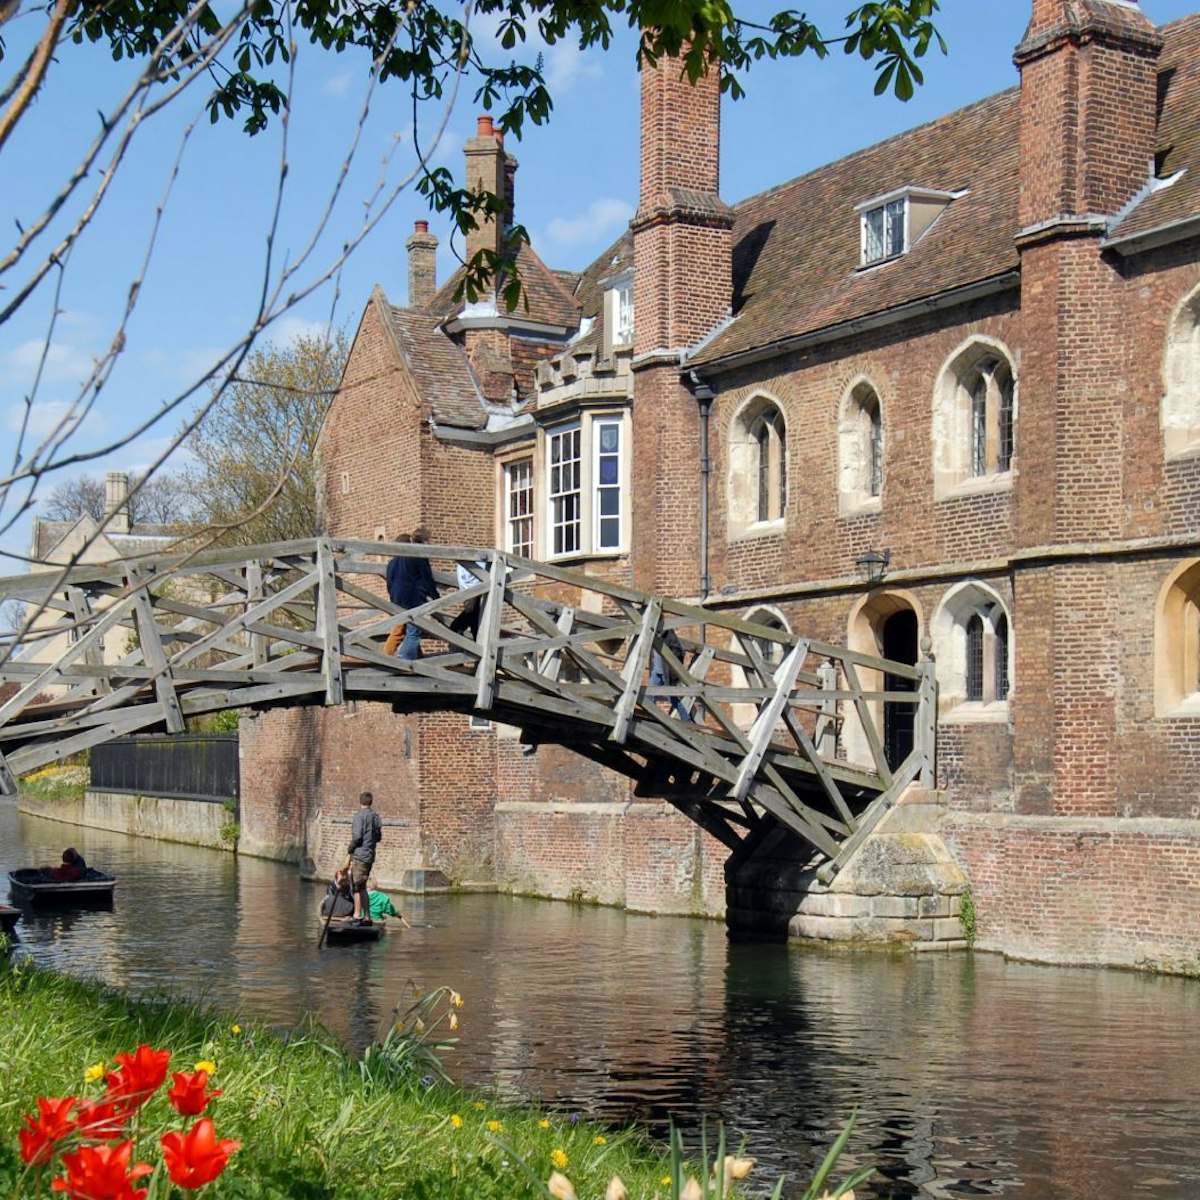 The Mathematical bridge at Queens college in Cambridge..Taken on a bright spring day.

Queens' College with bridge and flowers
